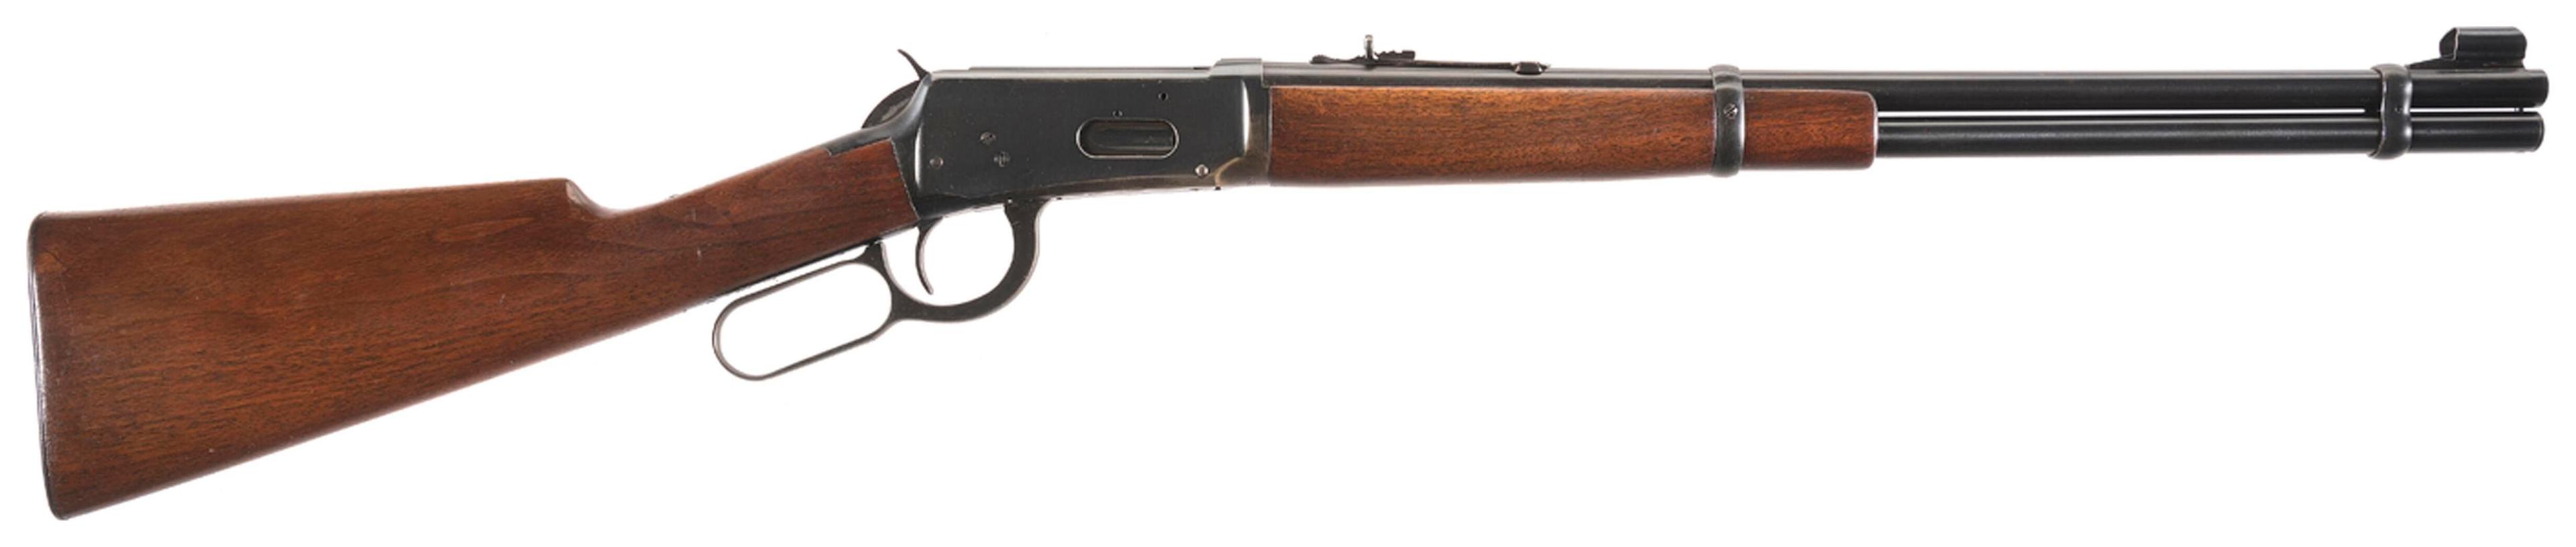 Two Pre-64 Winchester Model 94 Lever Action Carbines